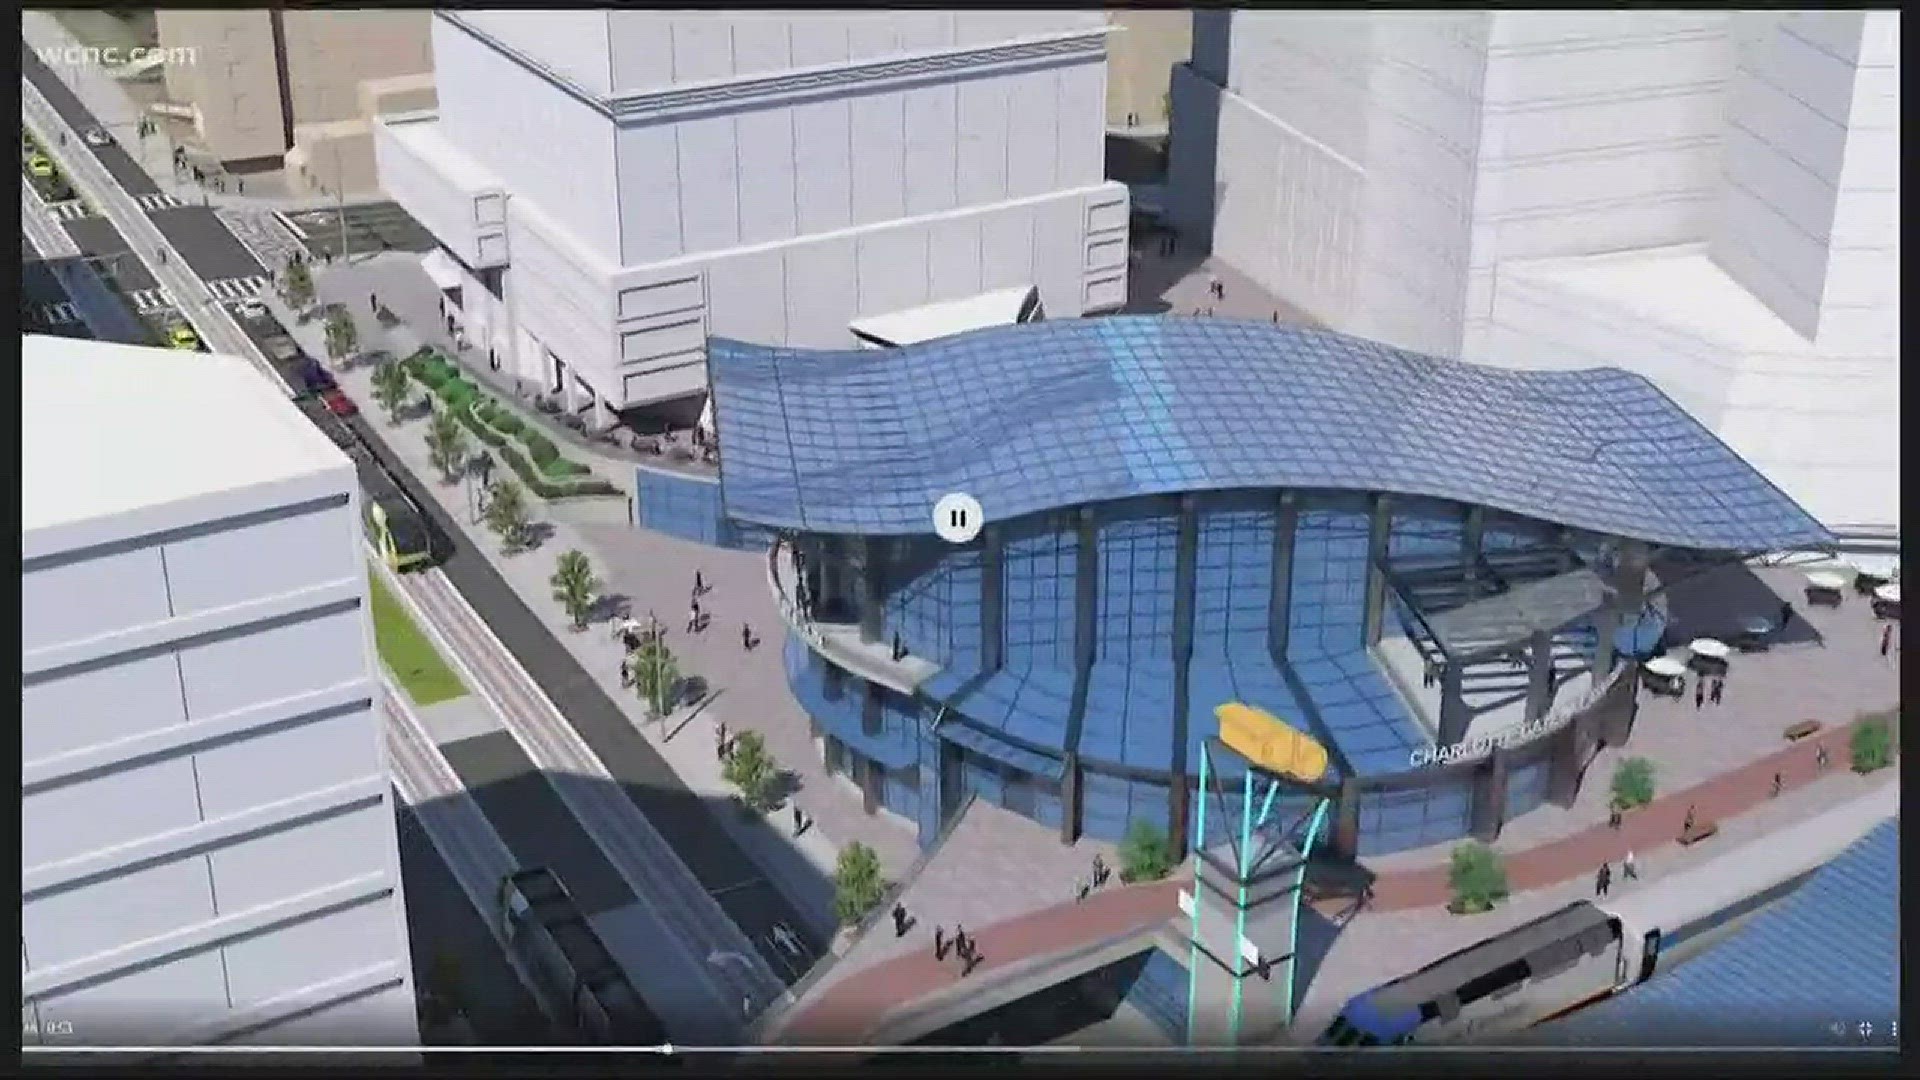 Charlotte officials will finally break ground on a long-awaited train station in uptown.